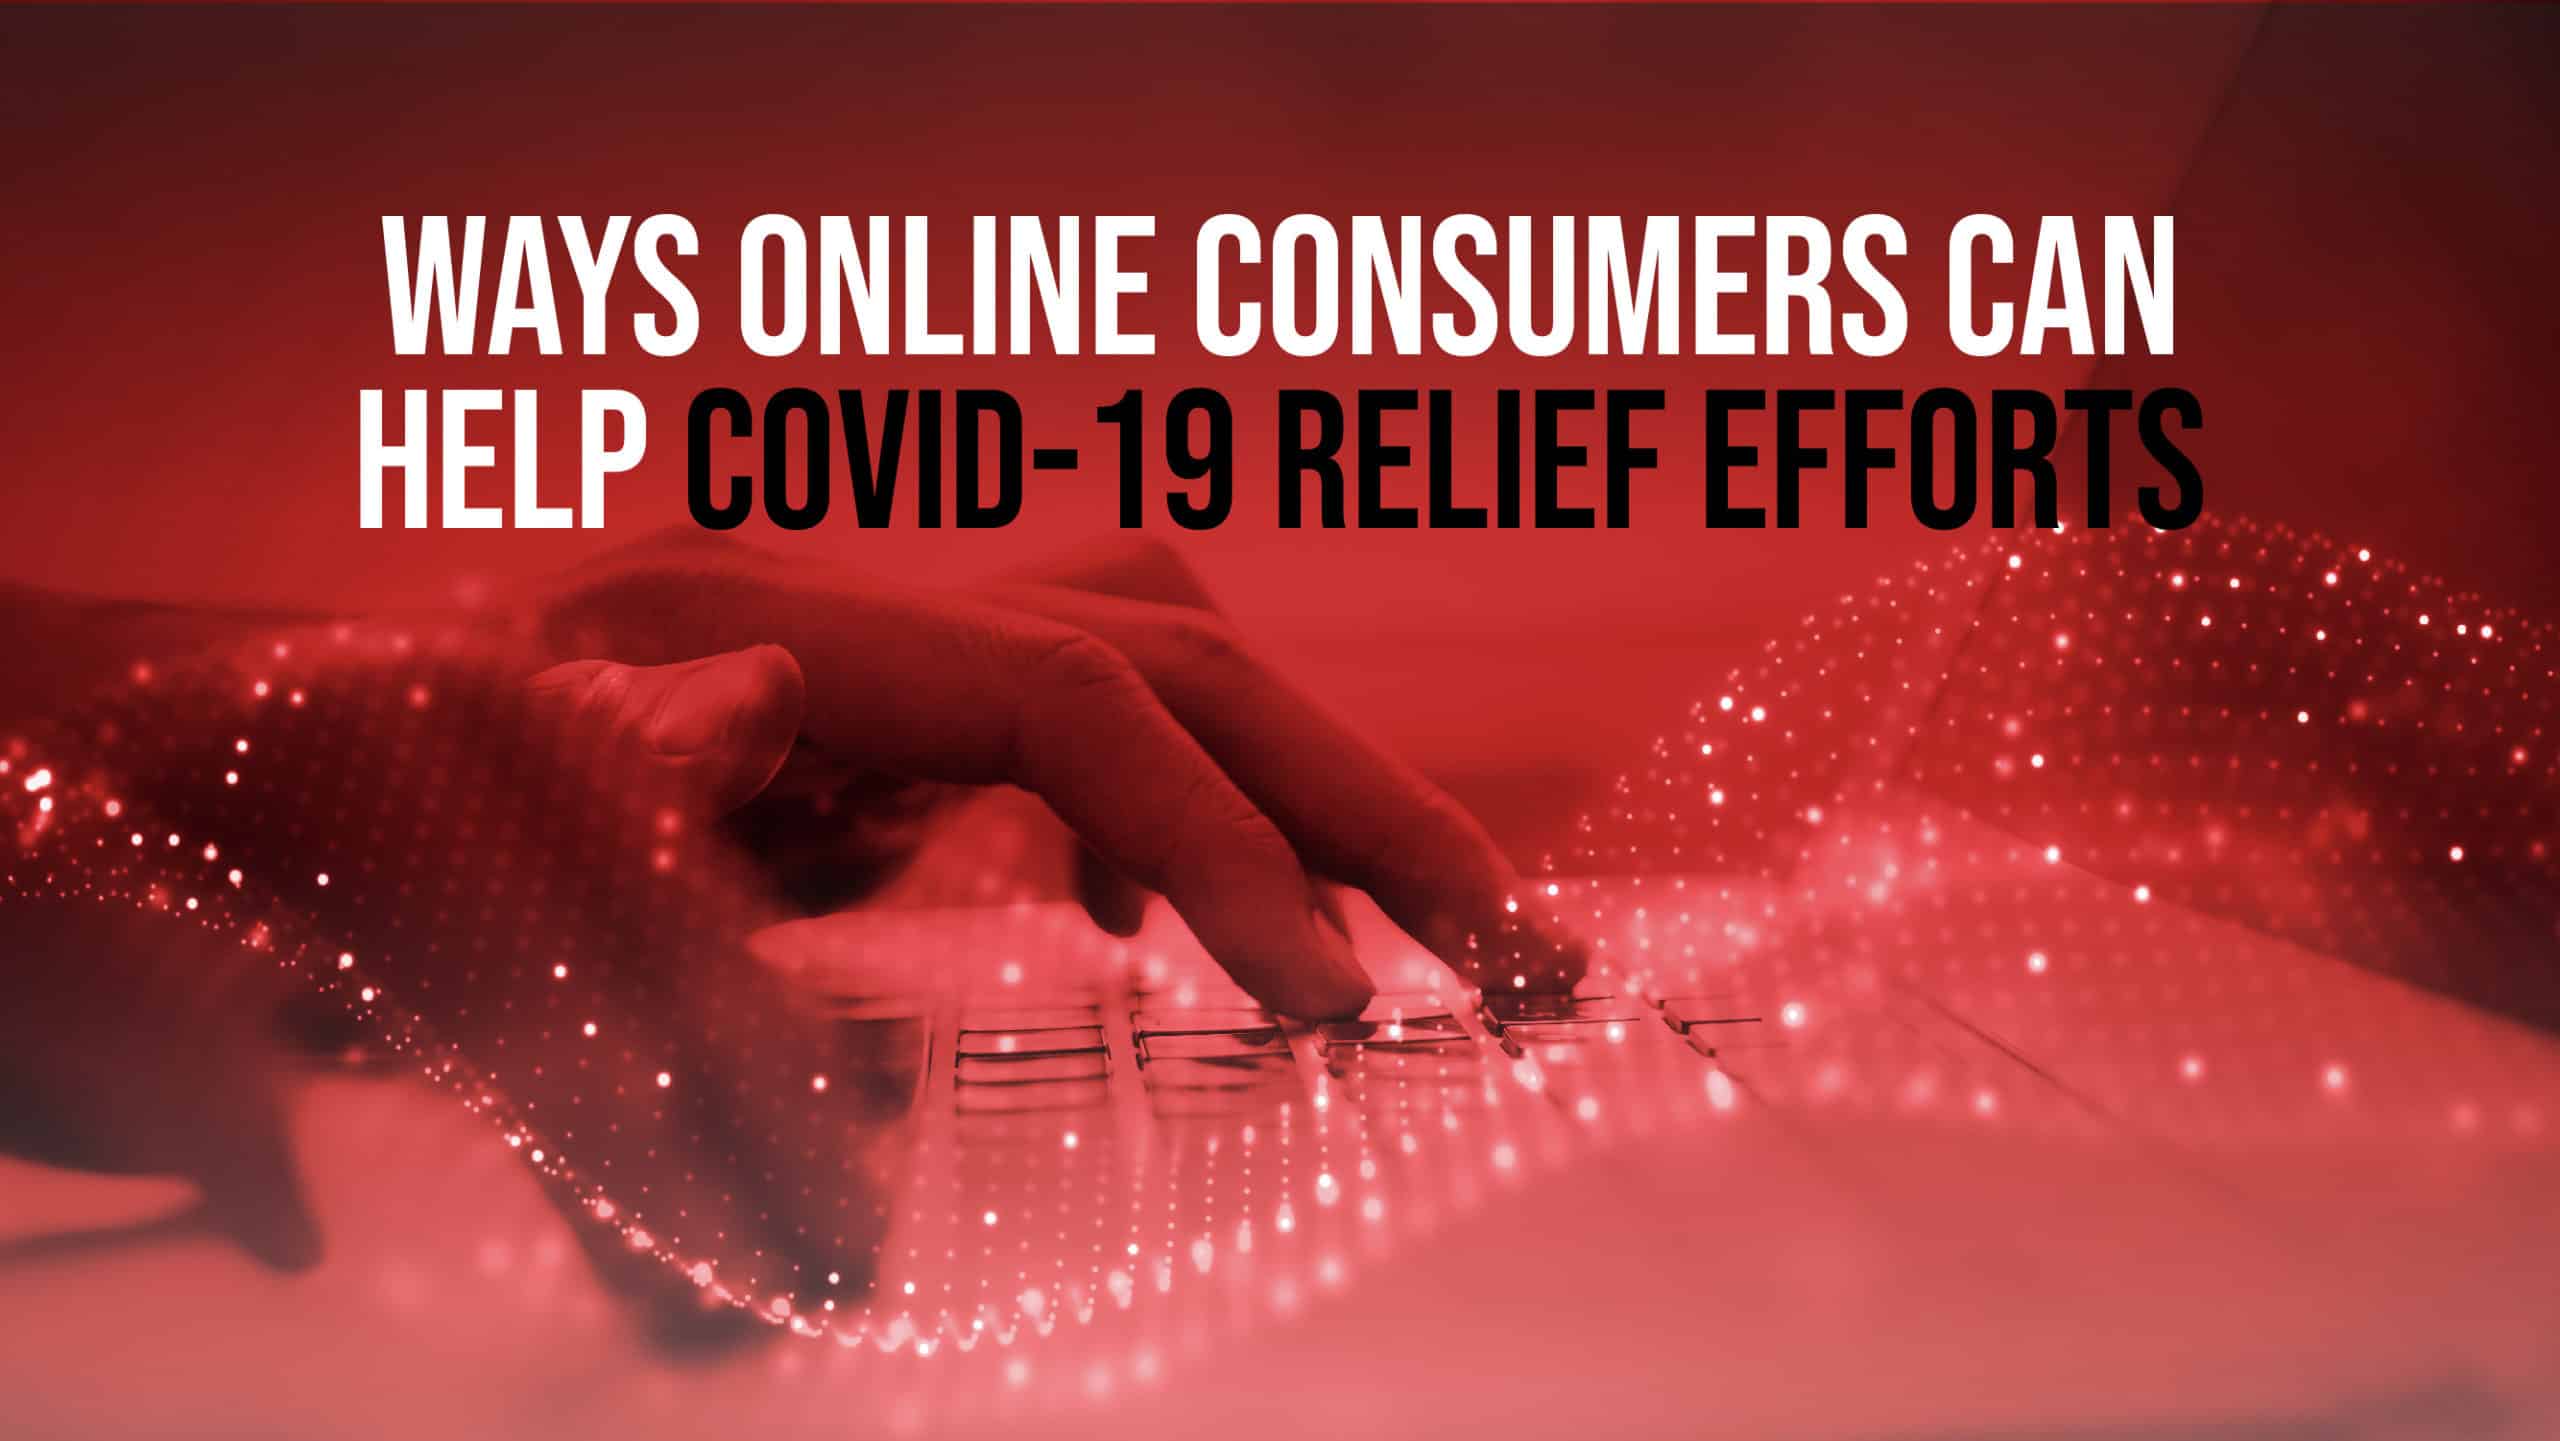 Ways Online Consumers Can Help COVID-19 Relief Efforts